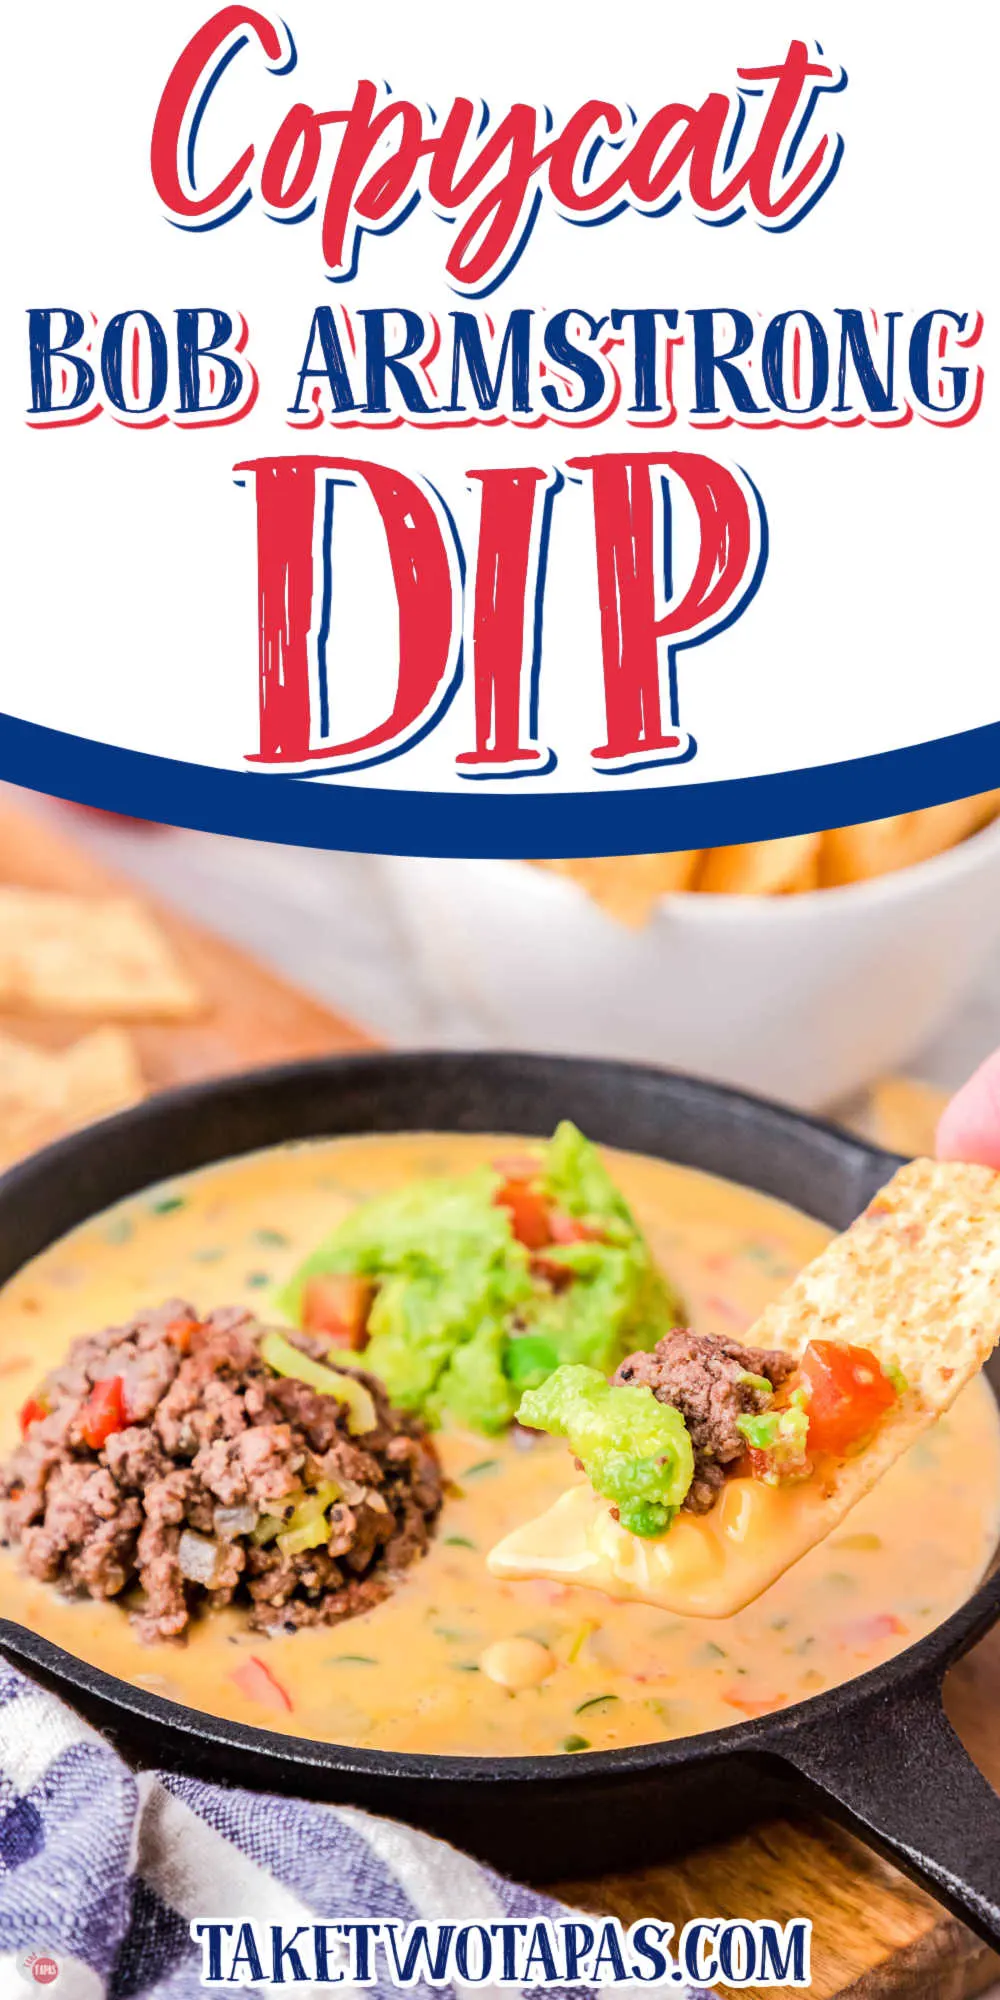 skillet dip with white banner and text "copycat bob armstrong dip"